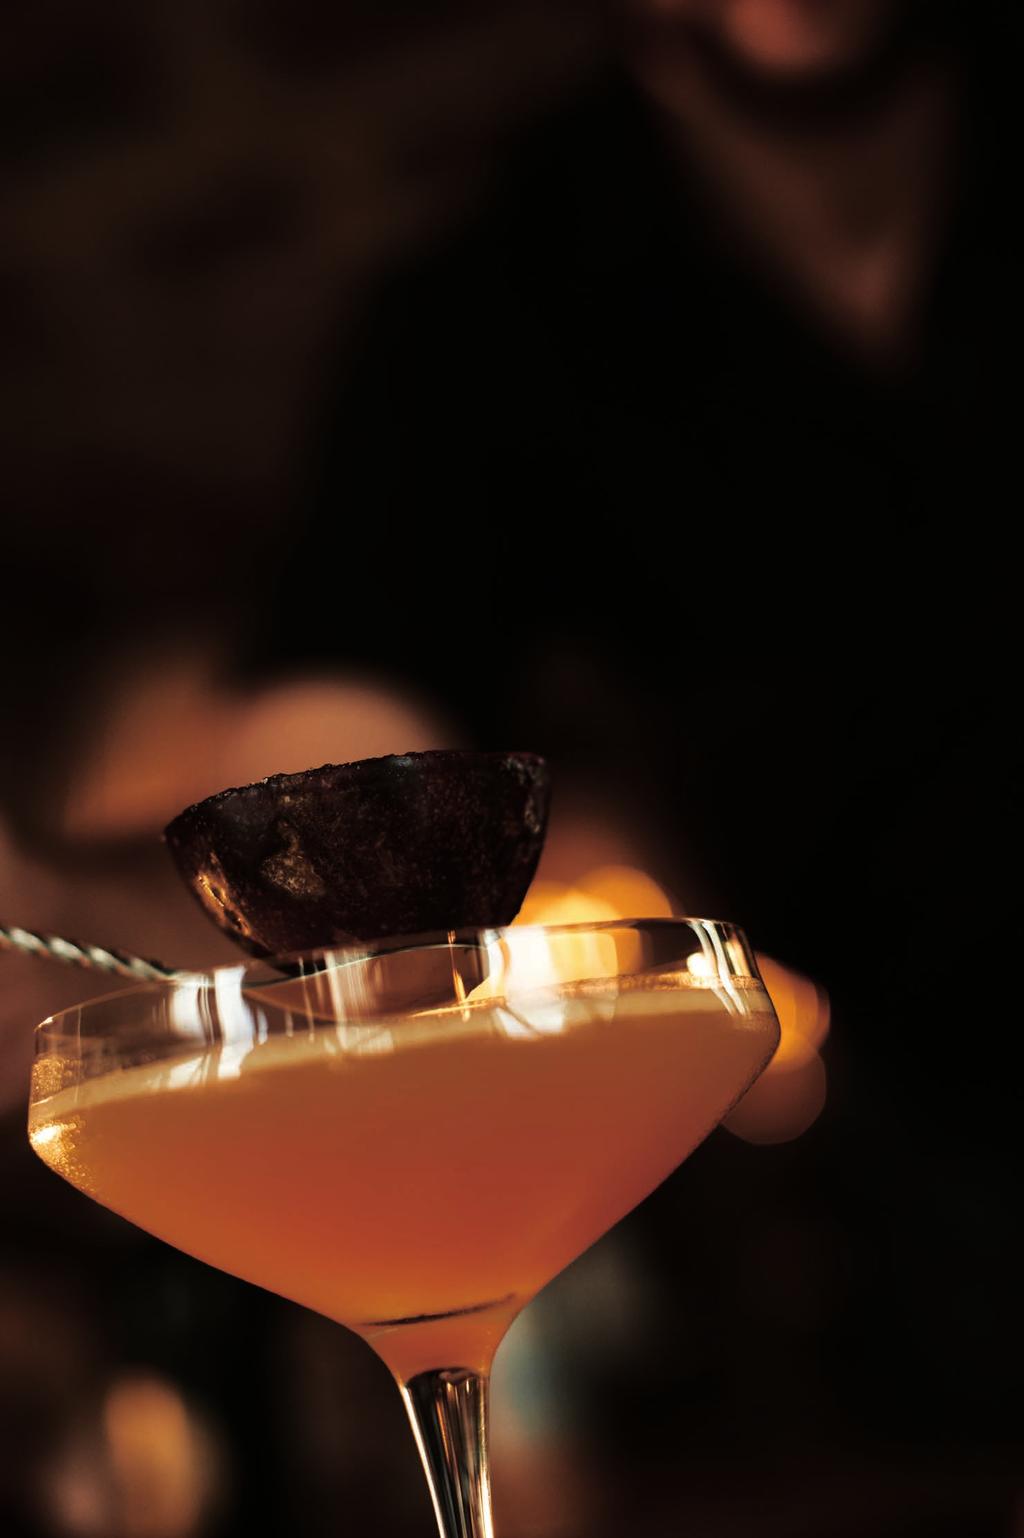 INTRODUCTION Cocktails have been a mainstay of popular bar culture for centuries.